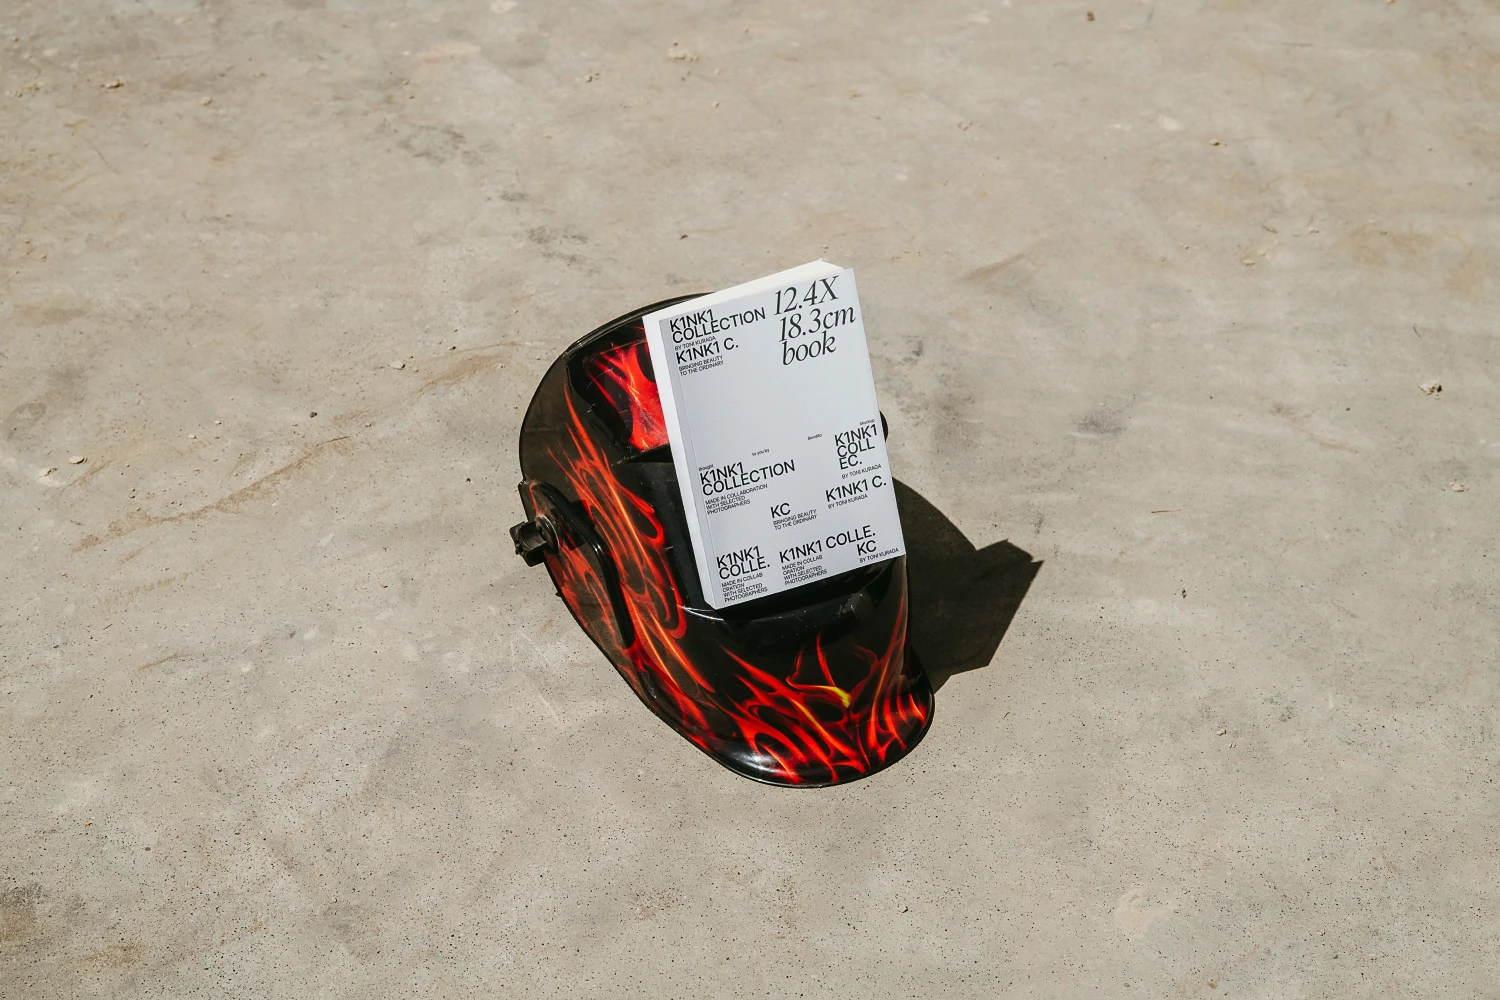 Paperback book mockup on a red helmet placed on an industrial floor.